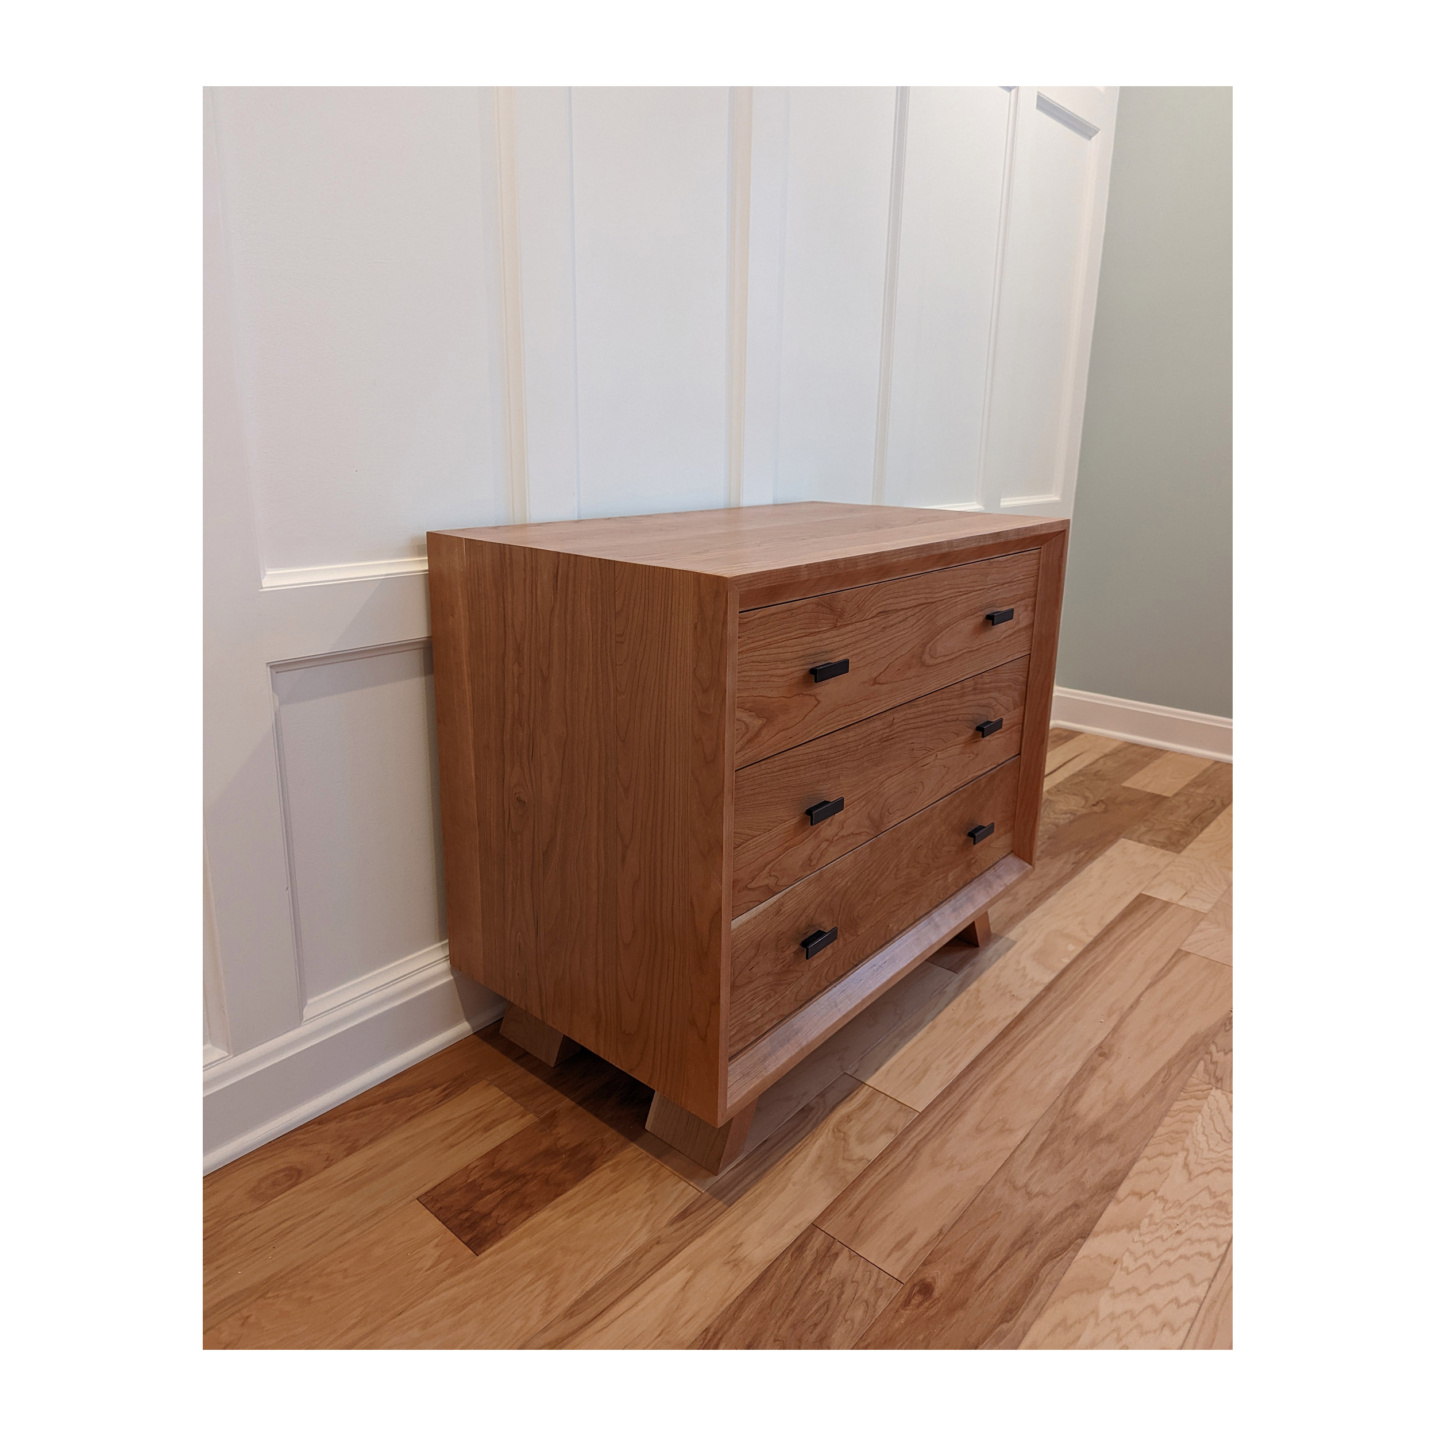 Three drawer wood Dresser in a Contemporary style three feet wide--Made by 57NorthPlank Tailored Modern Furniture